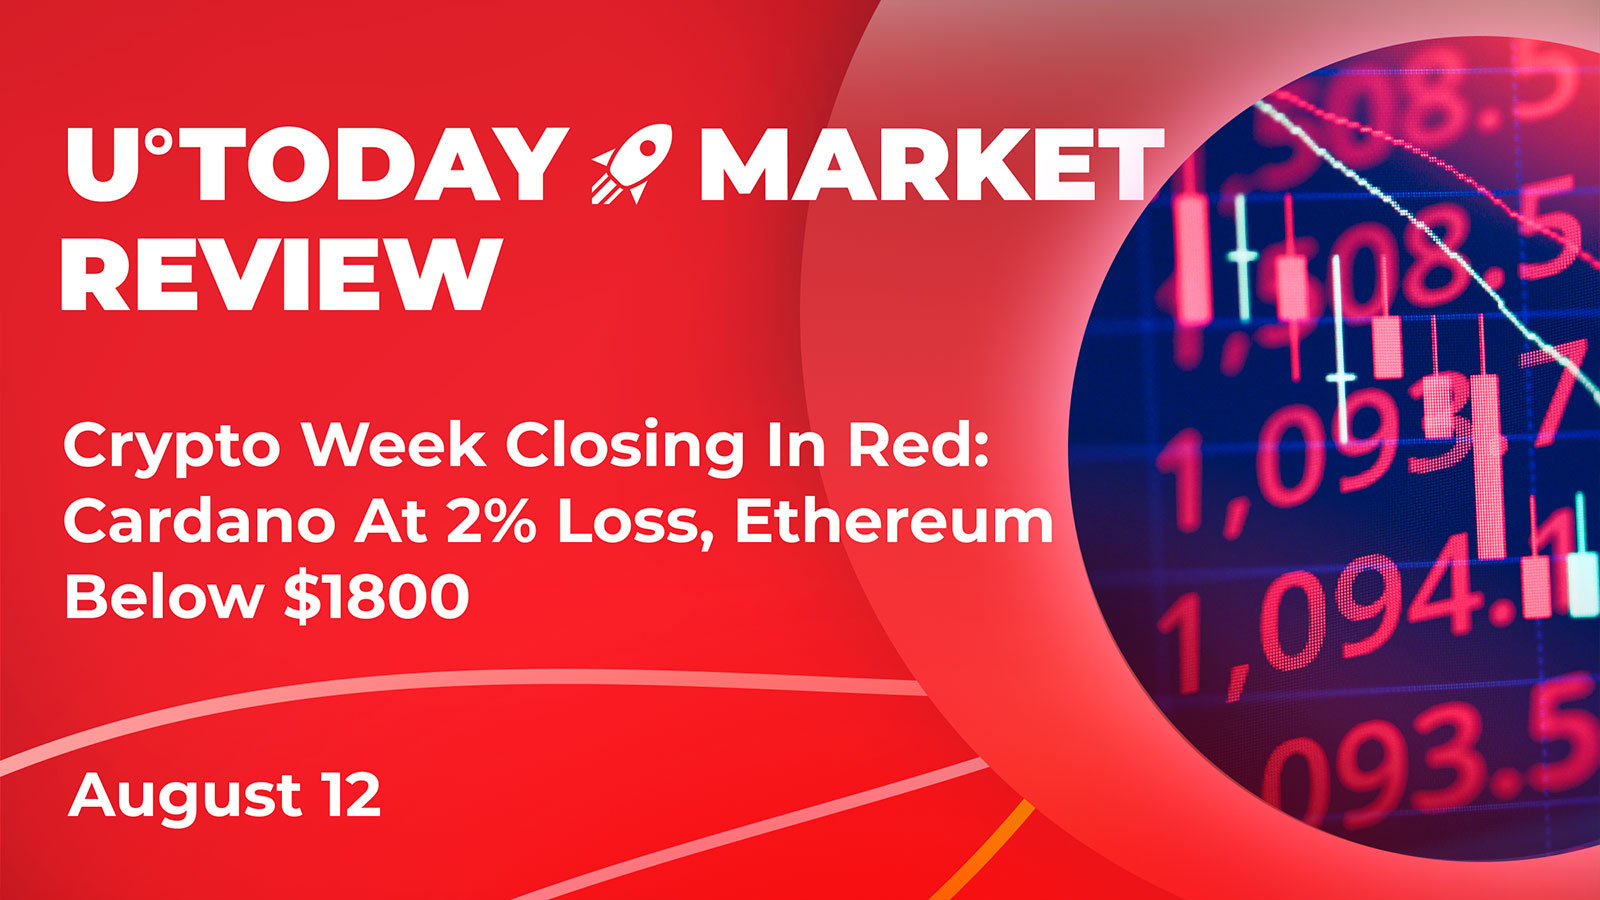 Crypto Week Closing In Red: Cardano (ADA) At 2% Loss, Ethereum (ETH) Below $1800: Crypto Market Review